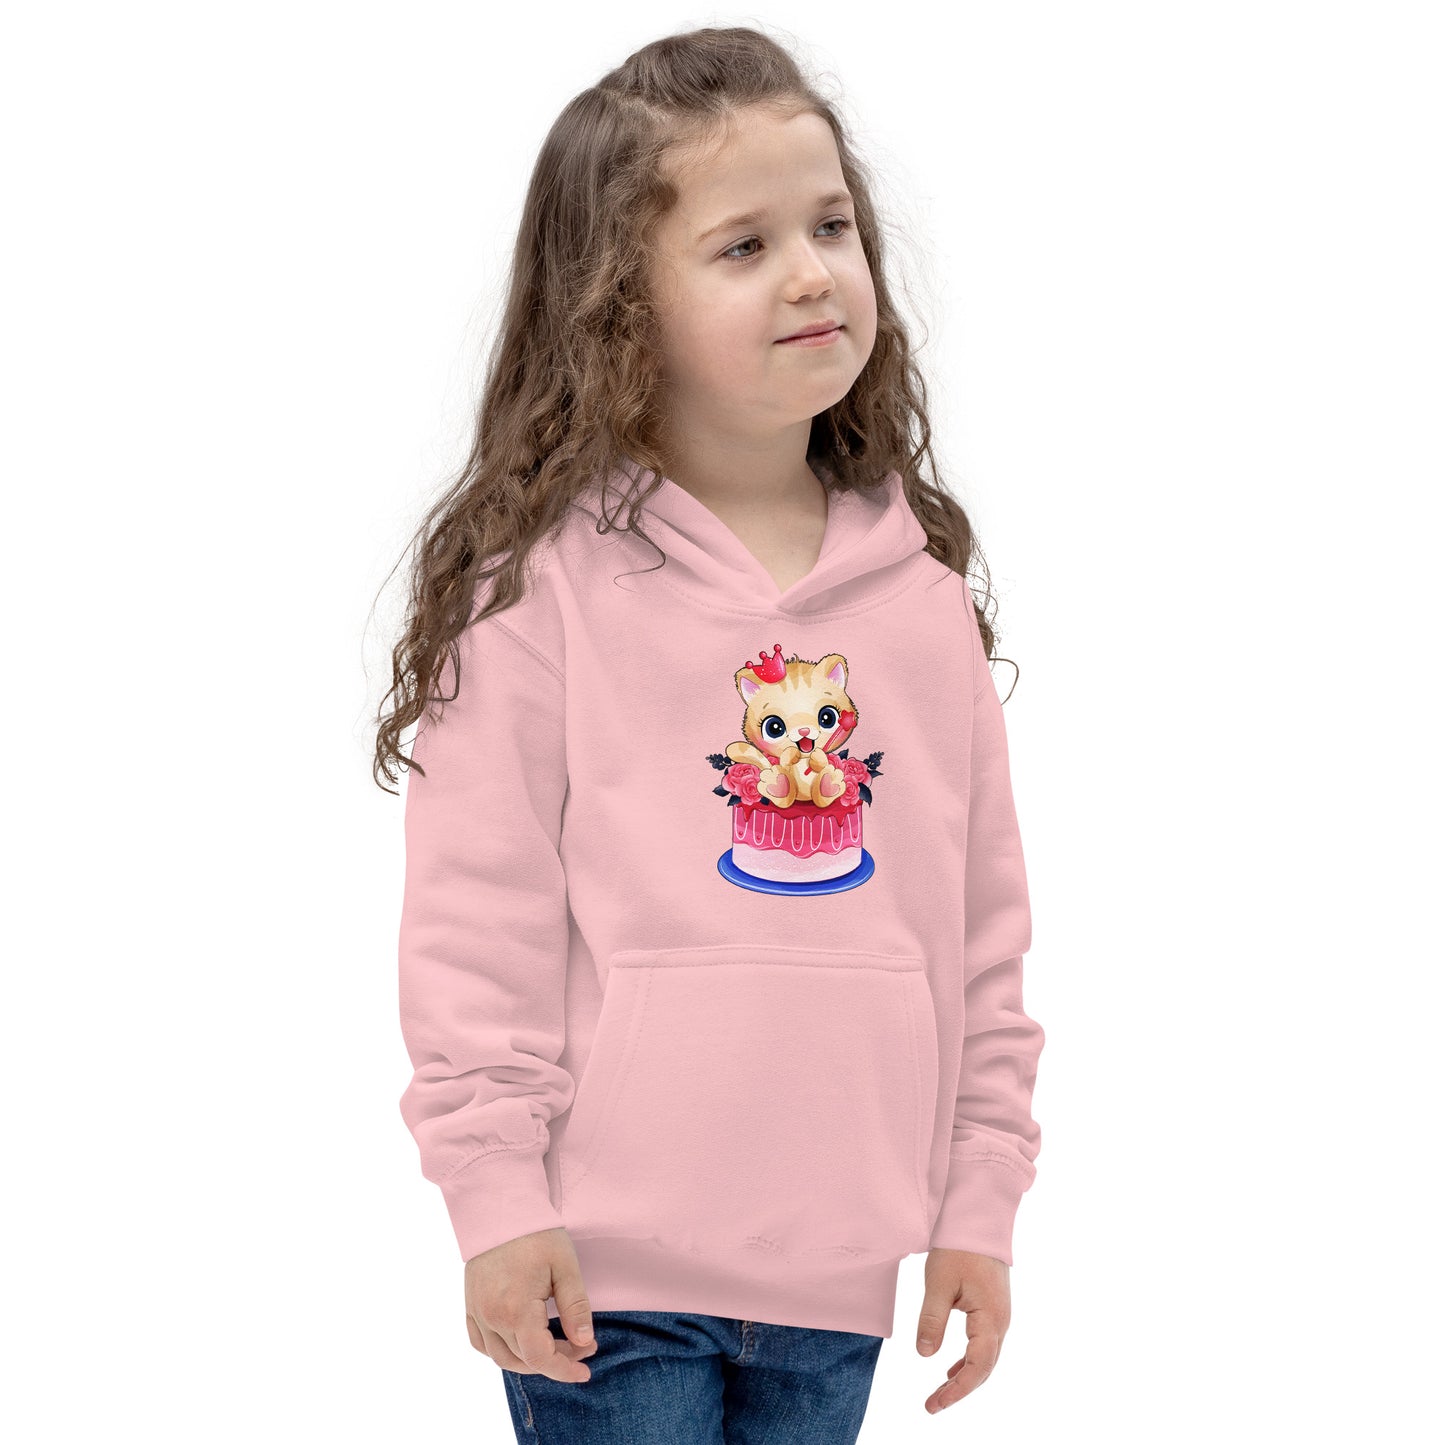 Lovely Baby Kitty Cat Sitting on Cake Hoodie, No. 0465